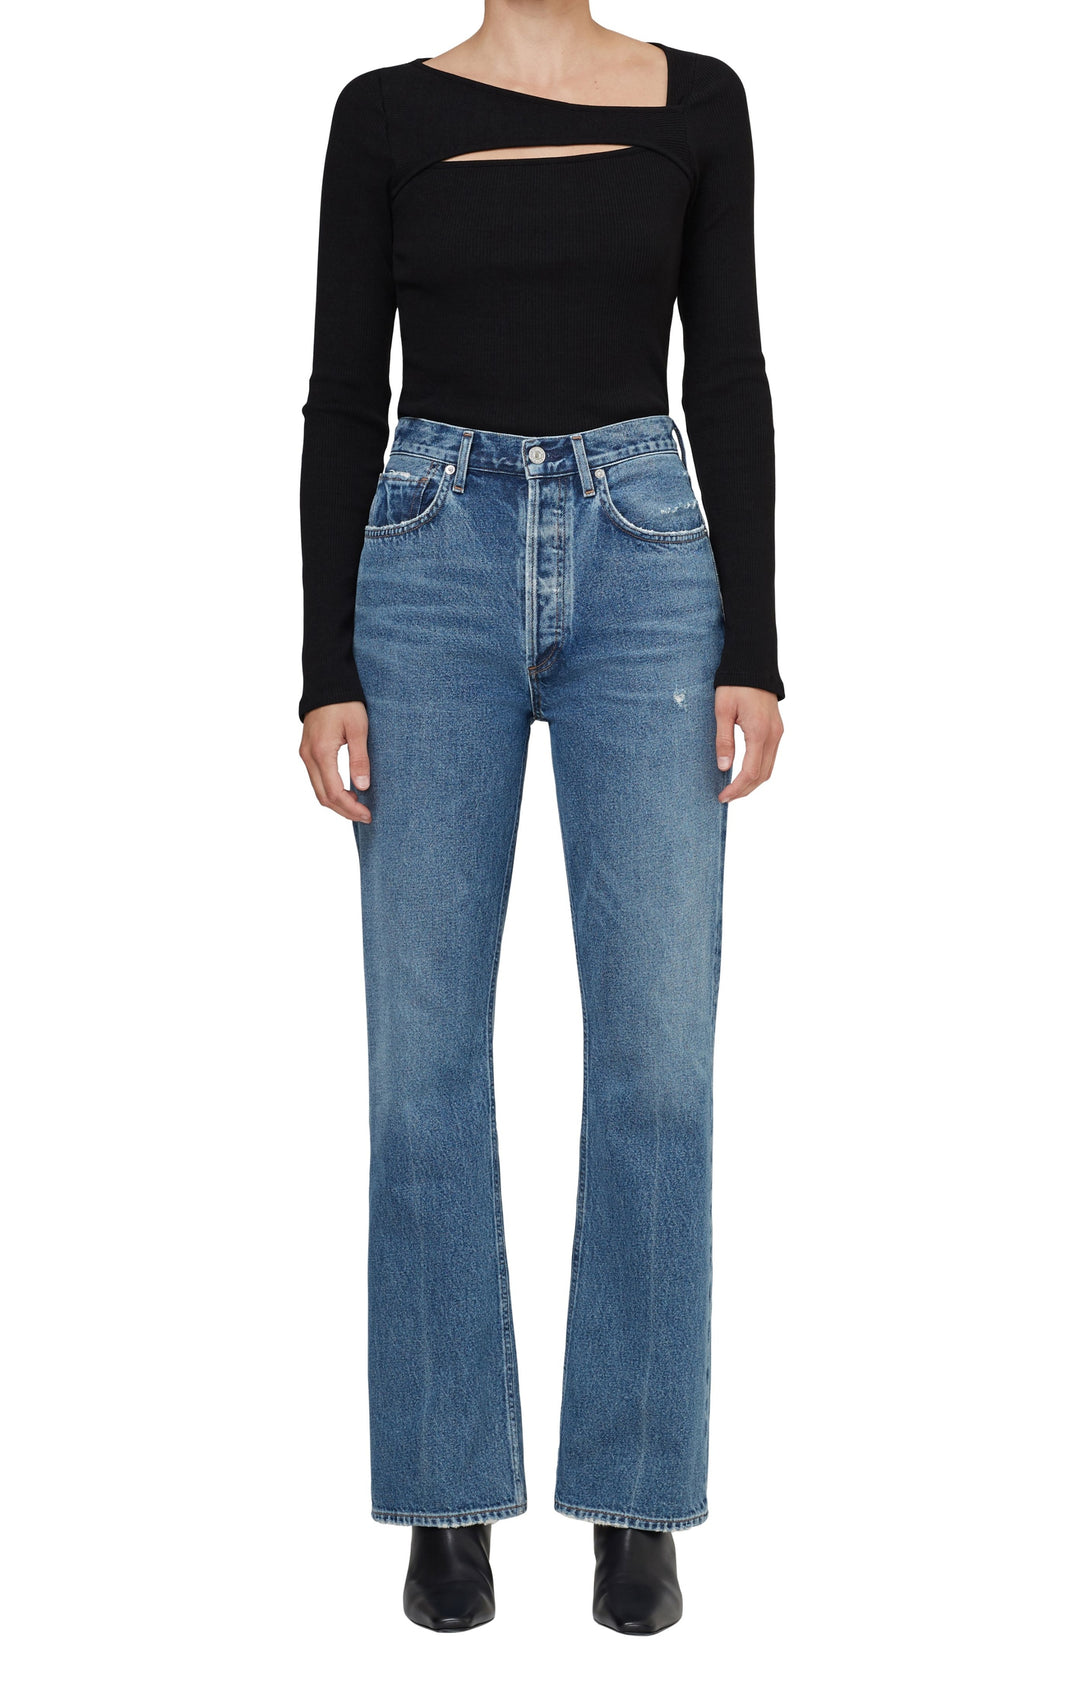 Citizens of Humanity - Libby Relaxed Bootcut Jeans in Big Sky